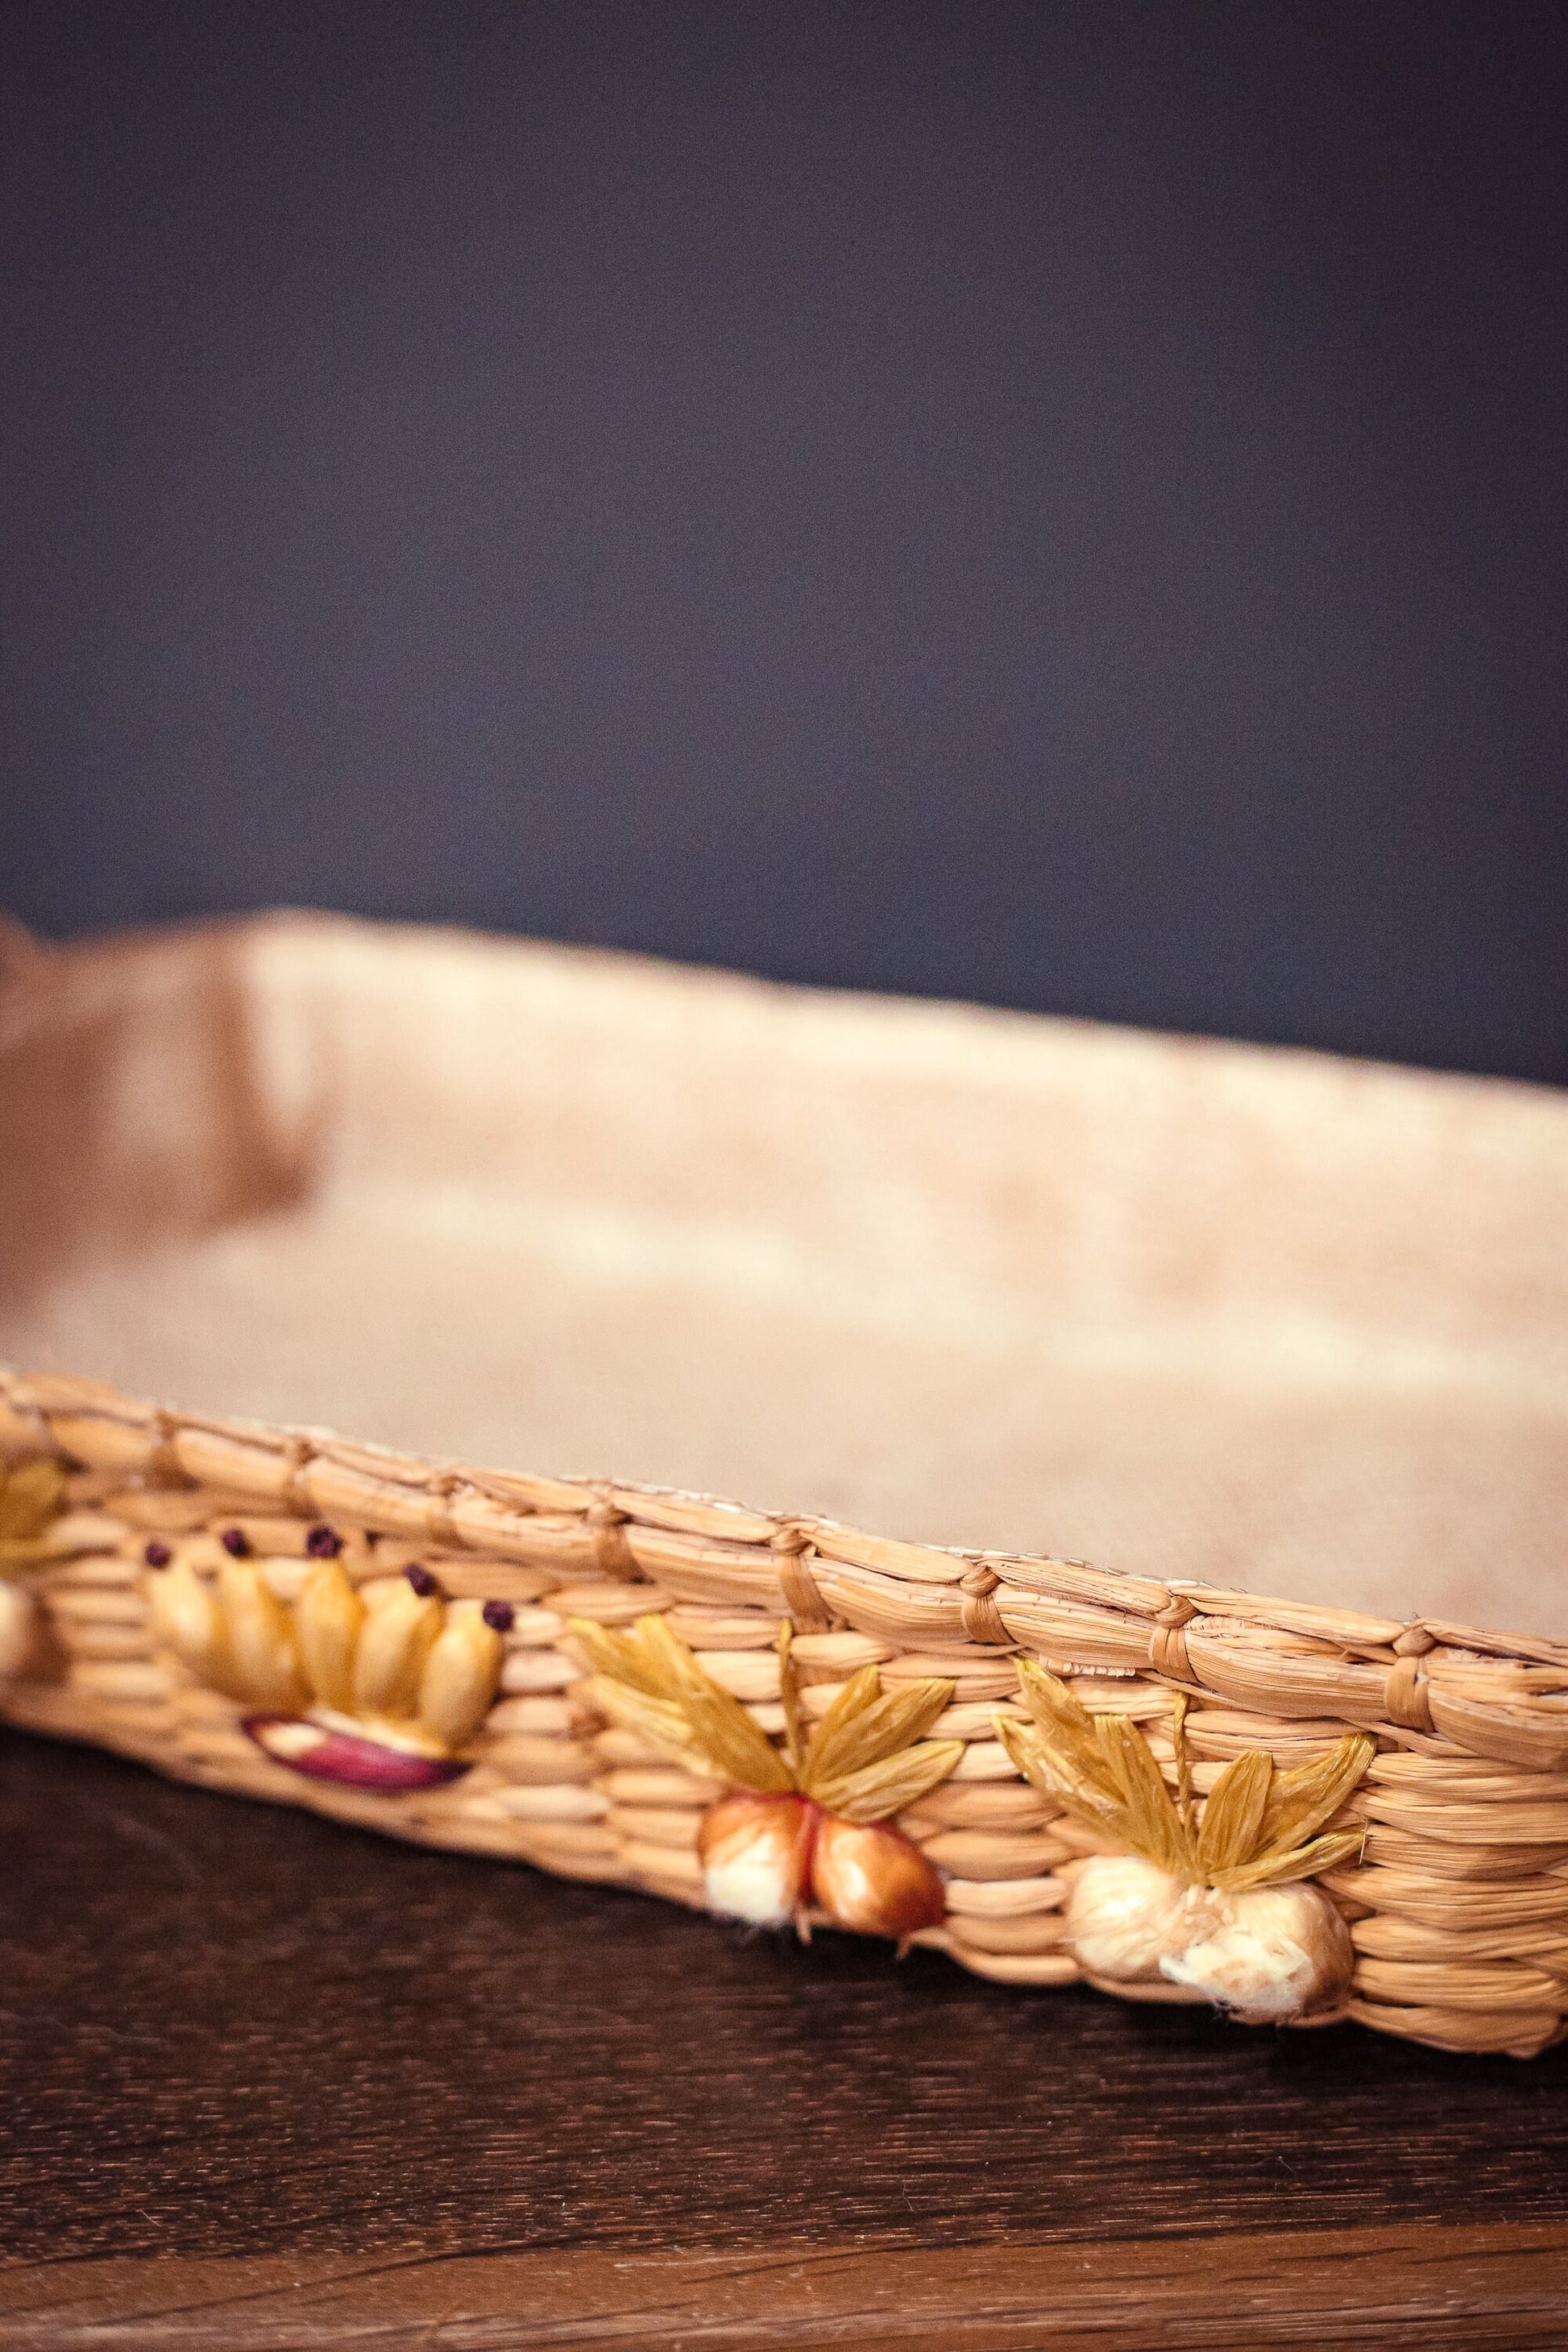 Low Rectangular Basket with Embroidered Onions Garlic - Vintage Straw Casserole Dish Holder with Raffia Embroidery